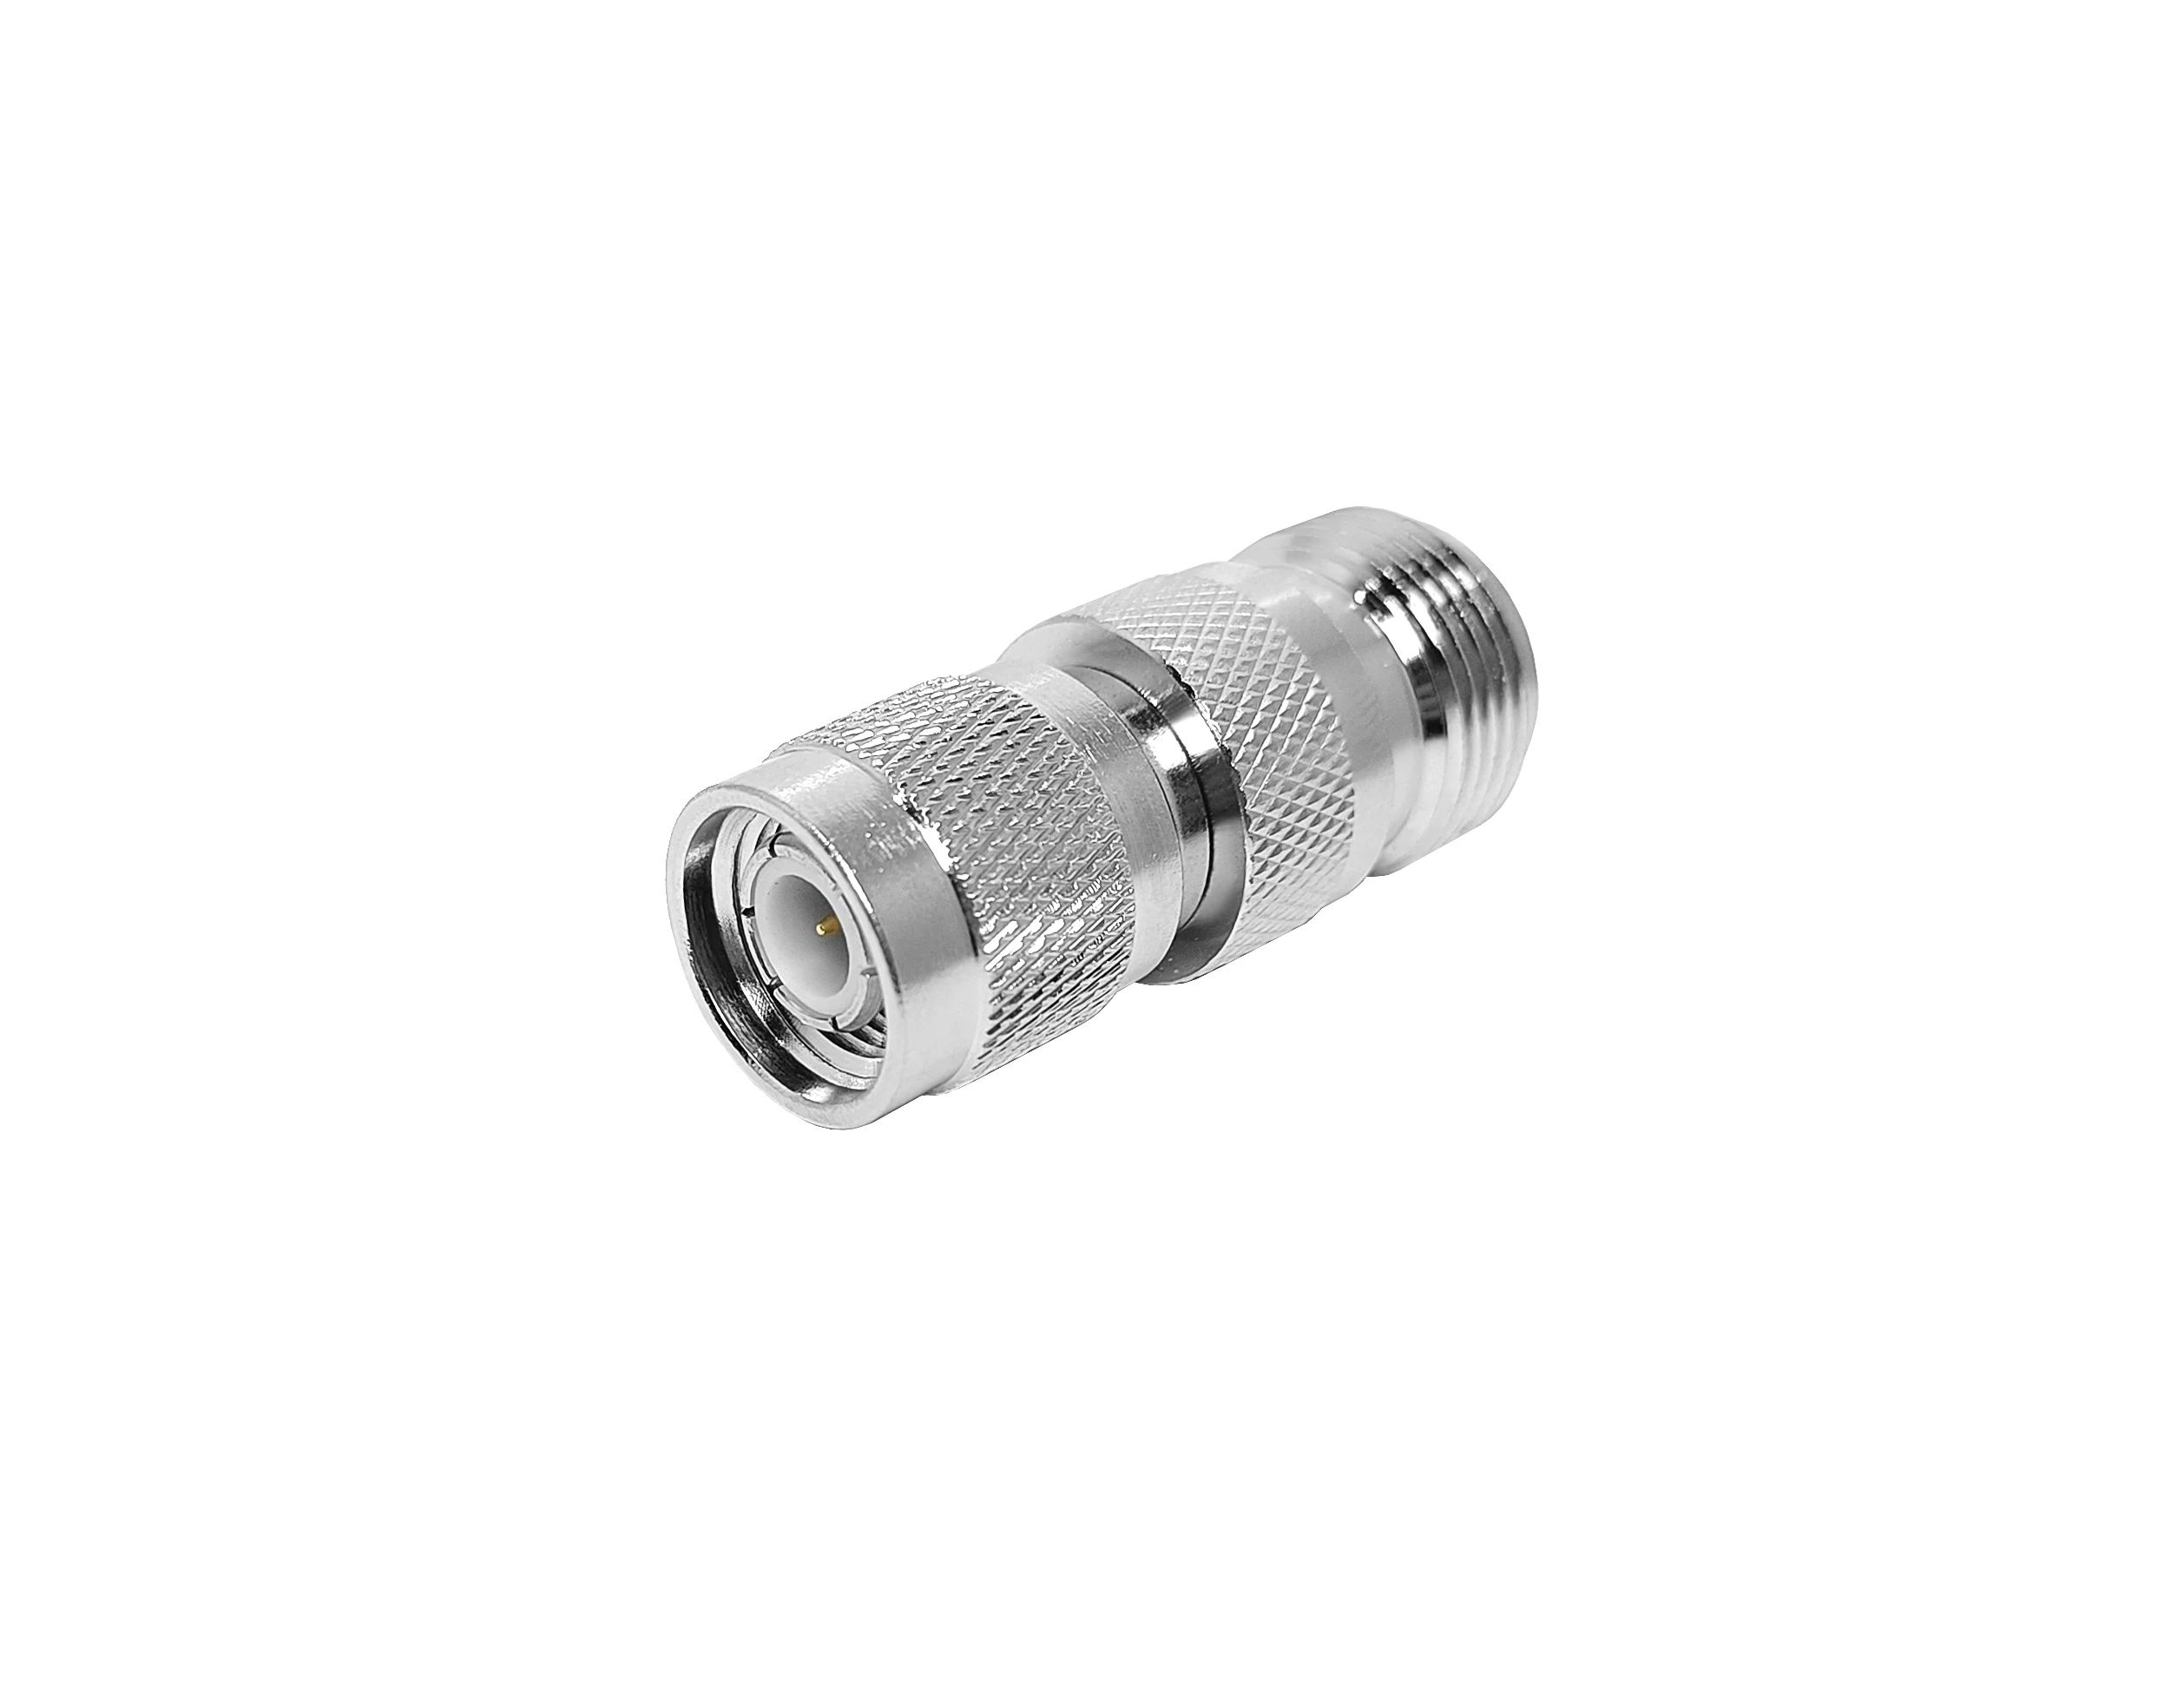 Tnc male Plug to N female Jack rf straight connector adapter details